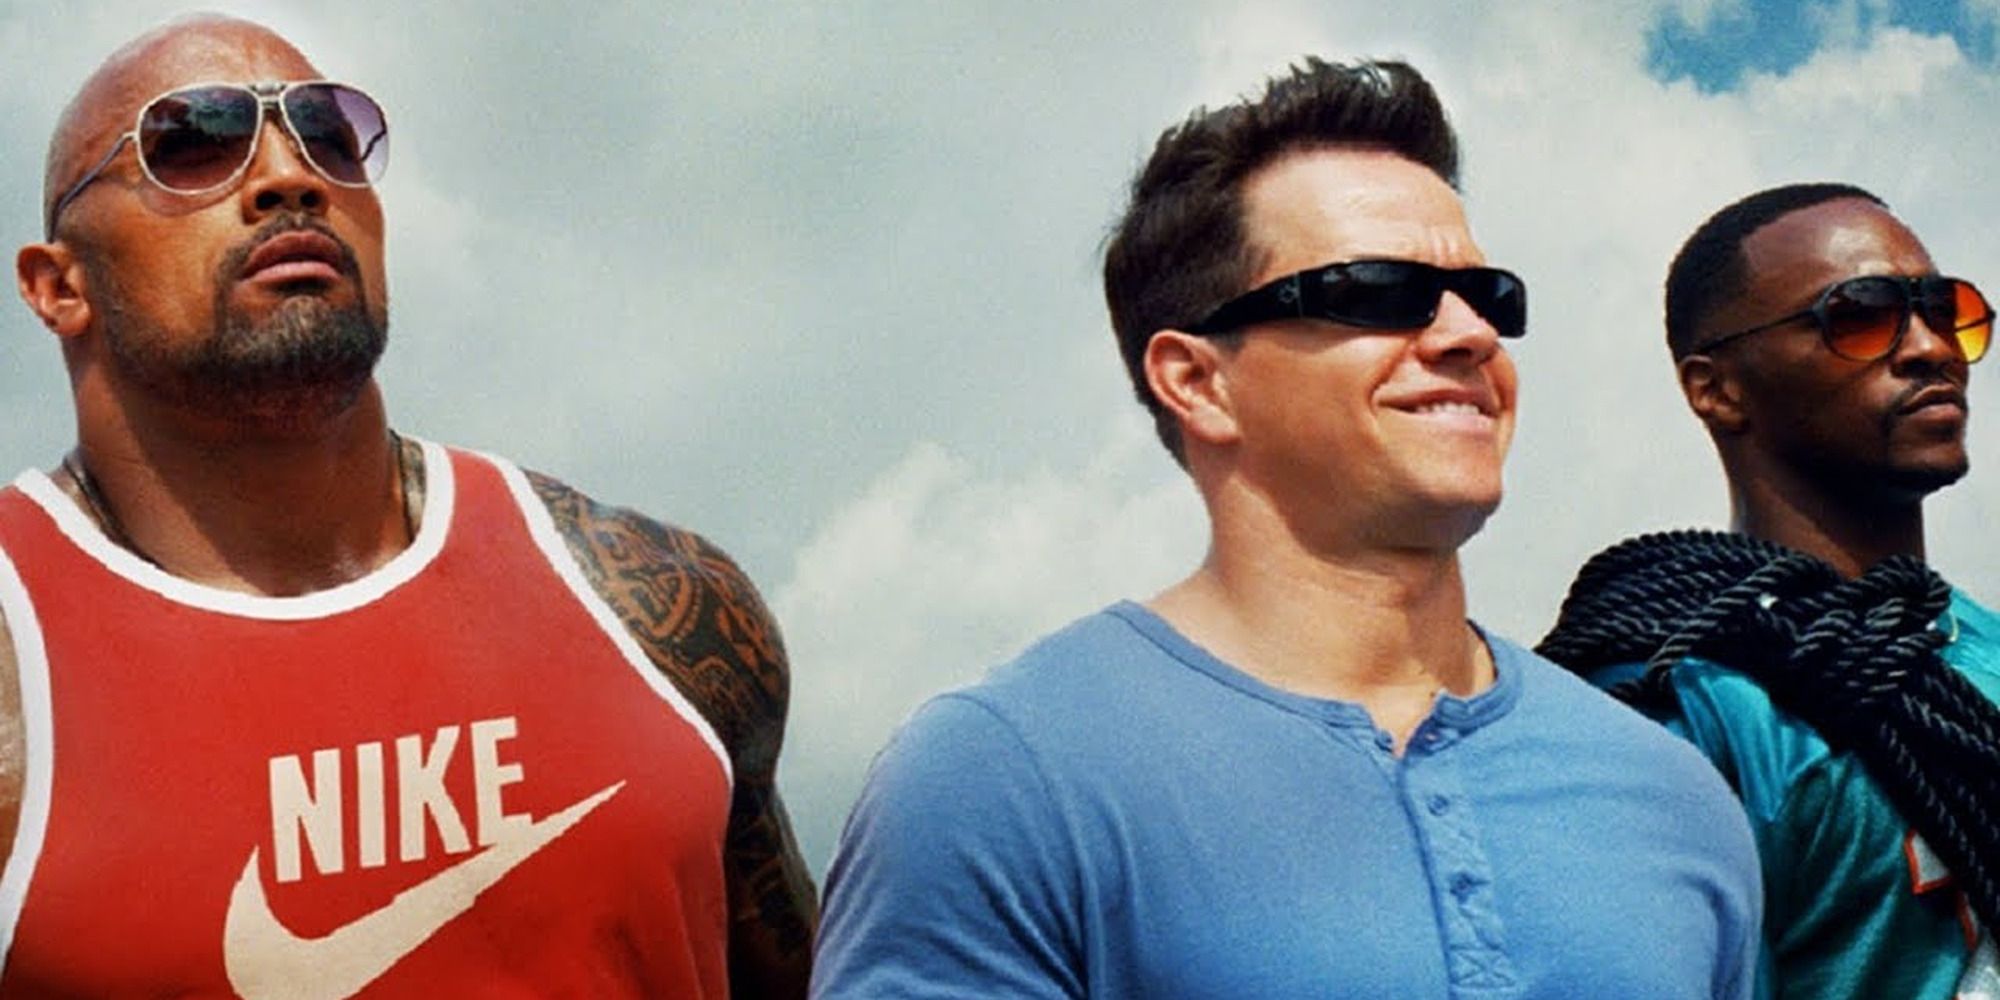 The Rock, Mark Wahlberg, and Anthony Mackie with sunglasses outdoors